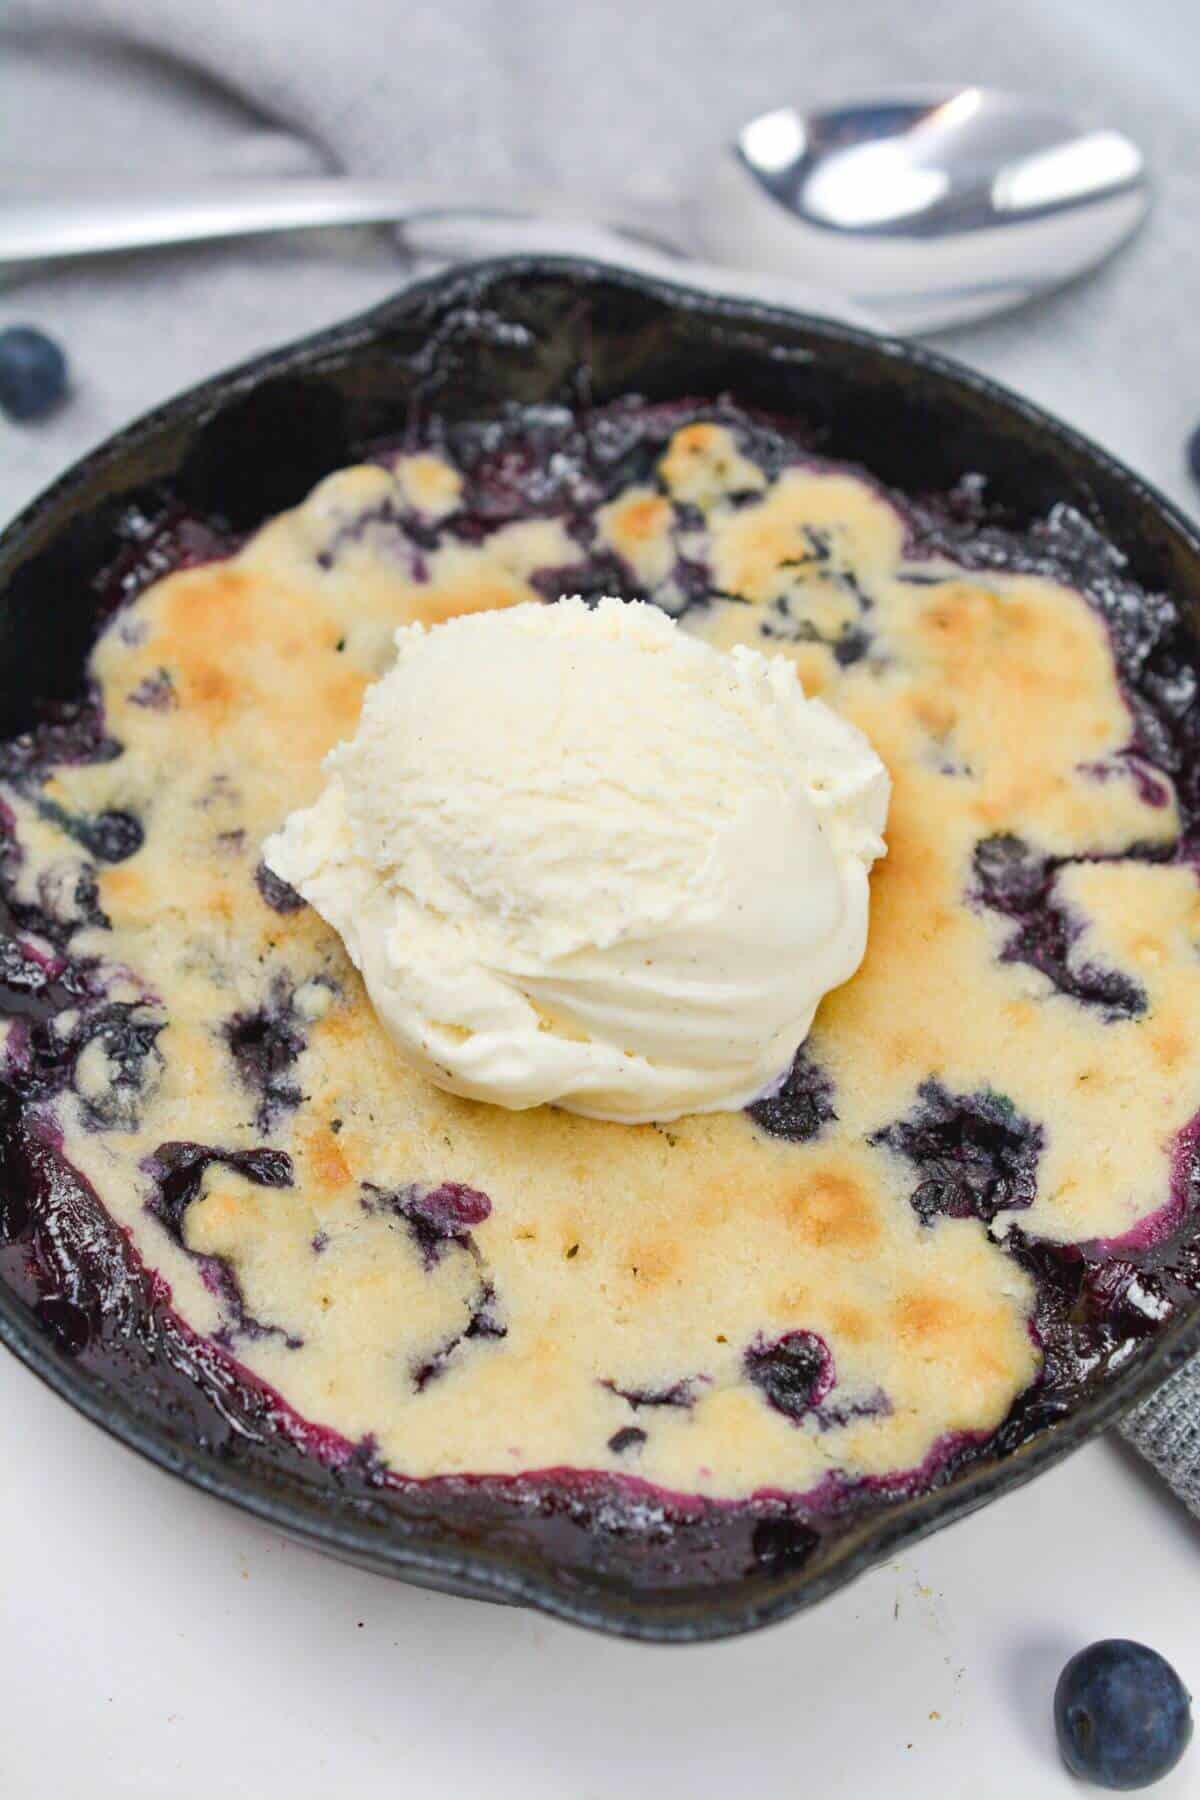 Cobbler for two with scoop of ice cream.